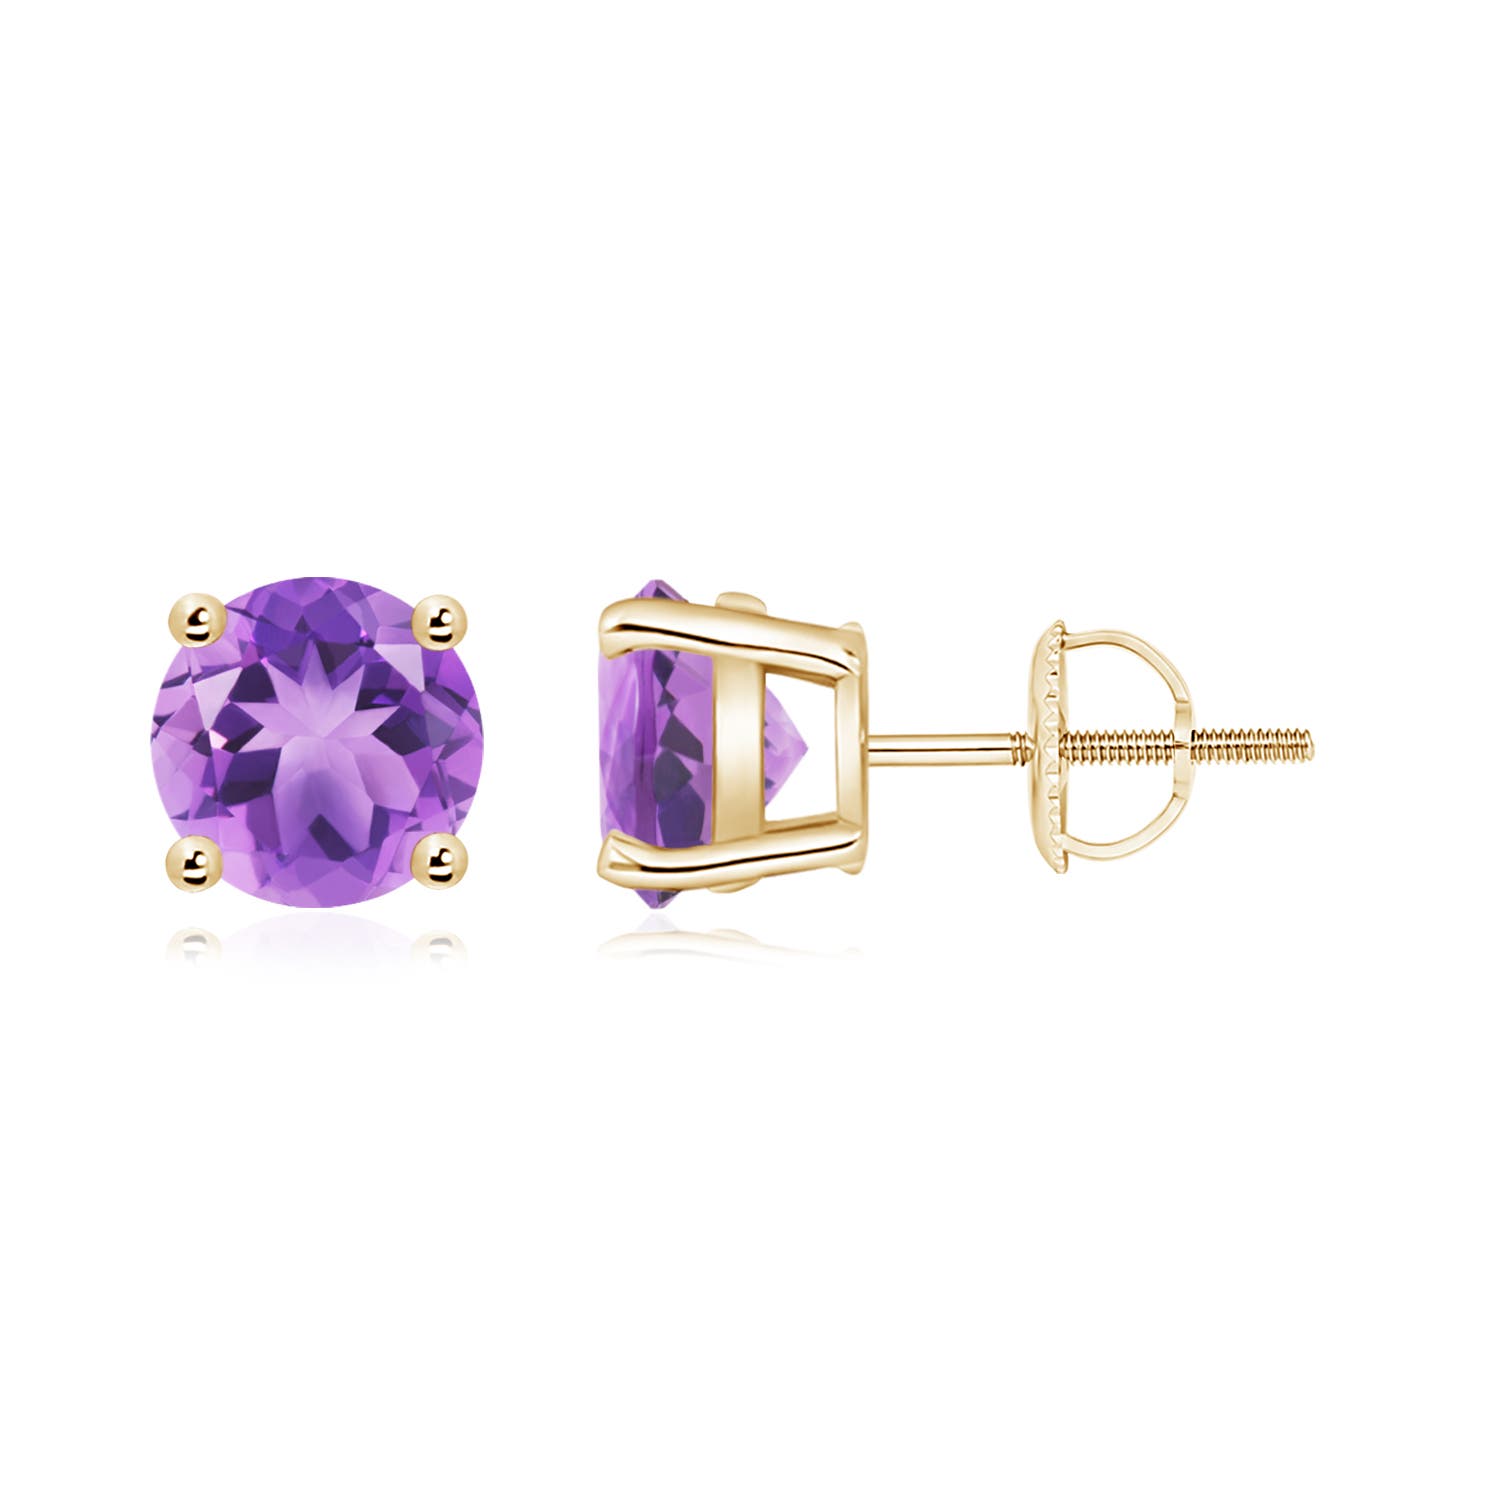 A - Amethyst / 2.3 CT / 14 KT Yellow Gold